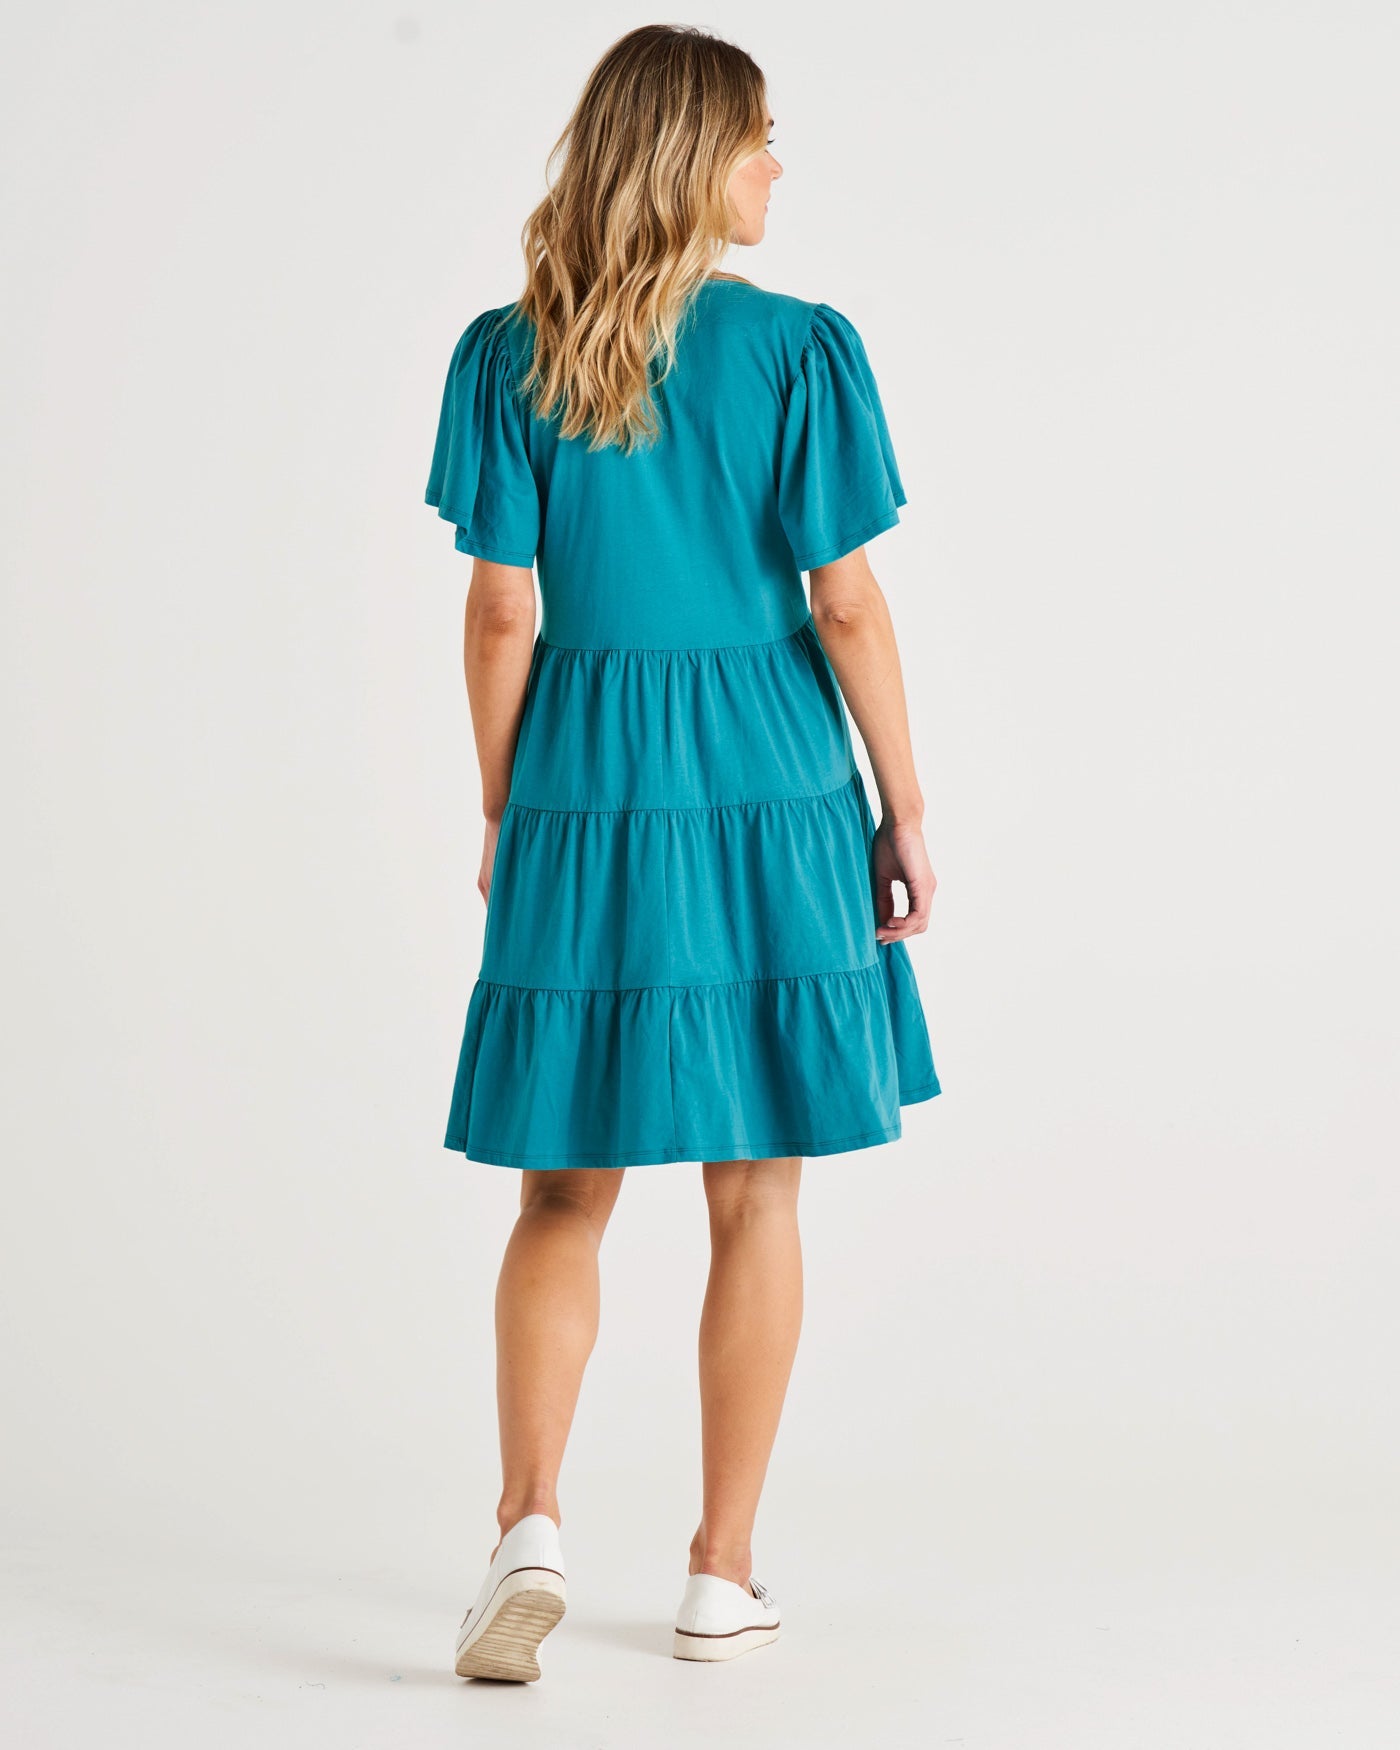 ***NEW*** Cressida Dress: Introducing the Cressida Dress your carefree chic essential! With a V-neck, flutter sleeves, a relaxed tiered body, and pockets for added flair, this dress effortles - Ciao Bella Dresses 